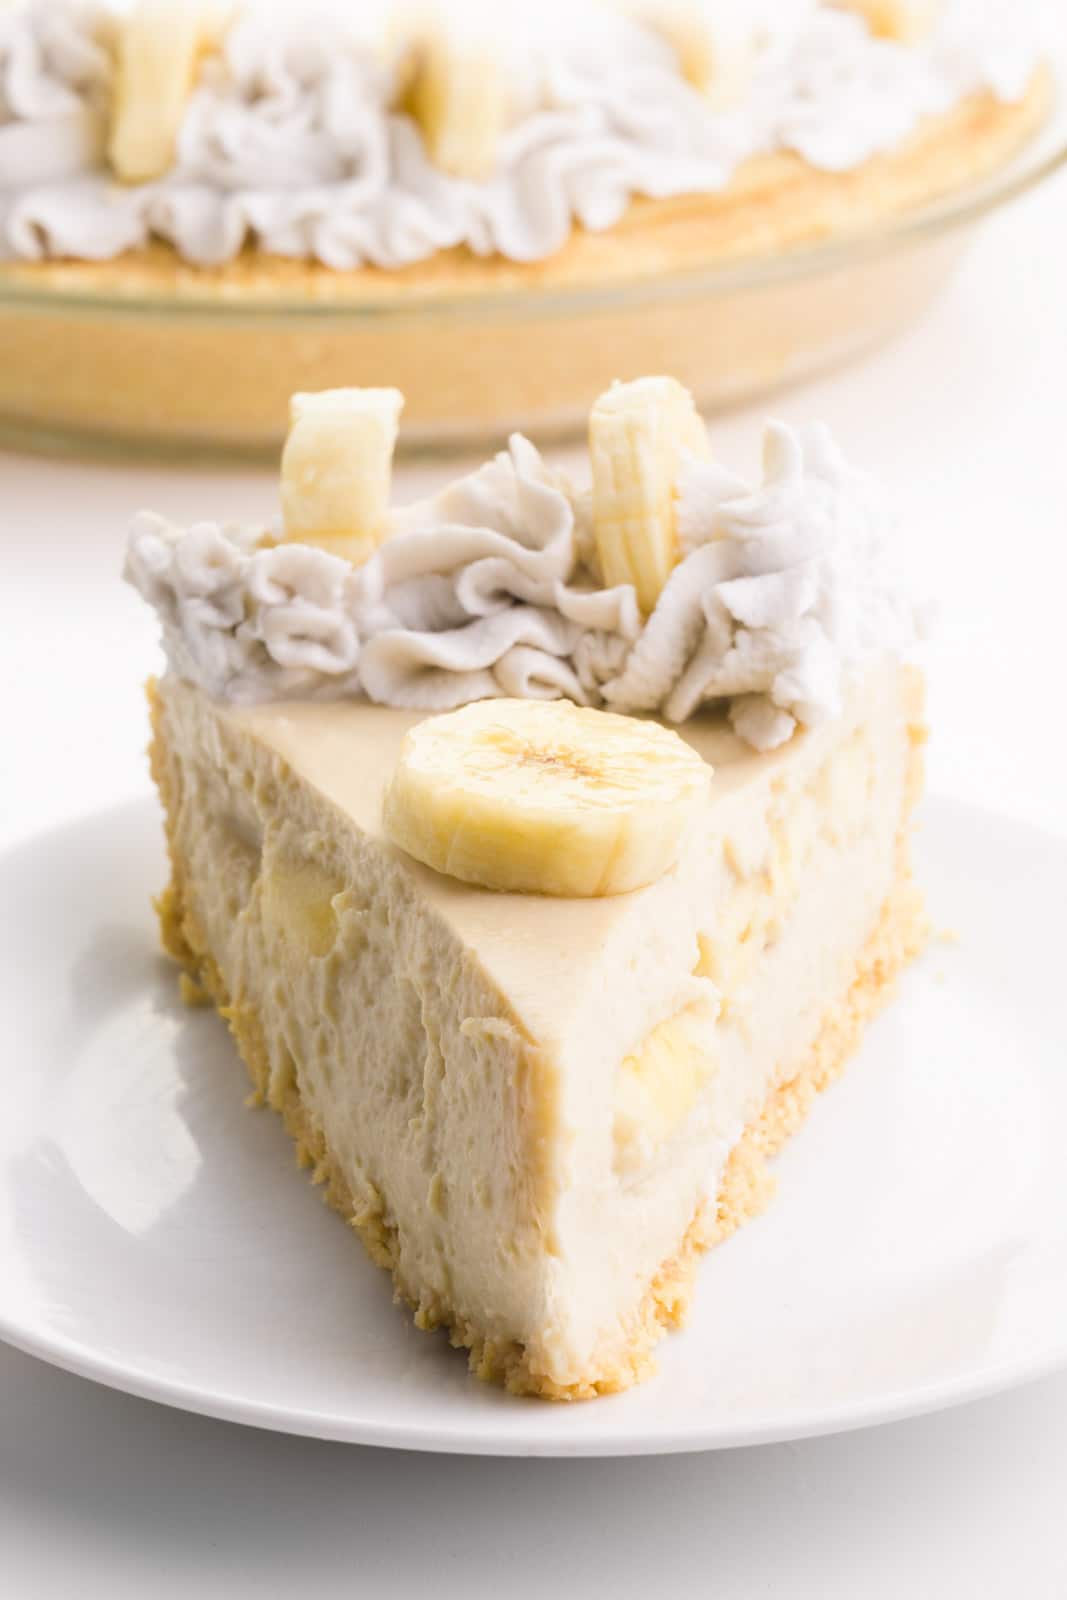 A slice of vegan banana cream pie sits on a plate. It has banana slices and coconut whipped cream on top. The rest of the pie is behind it.